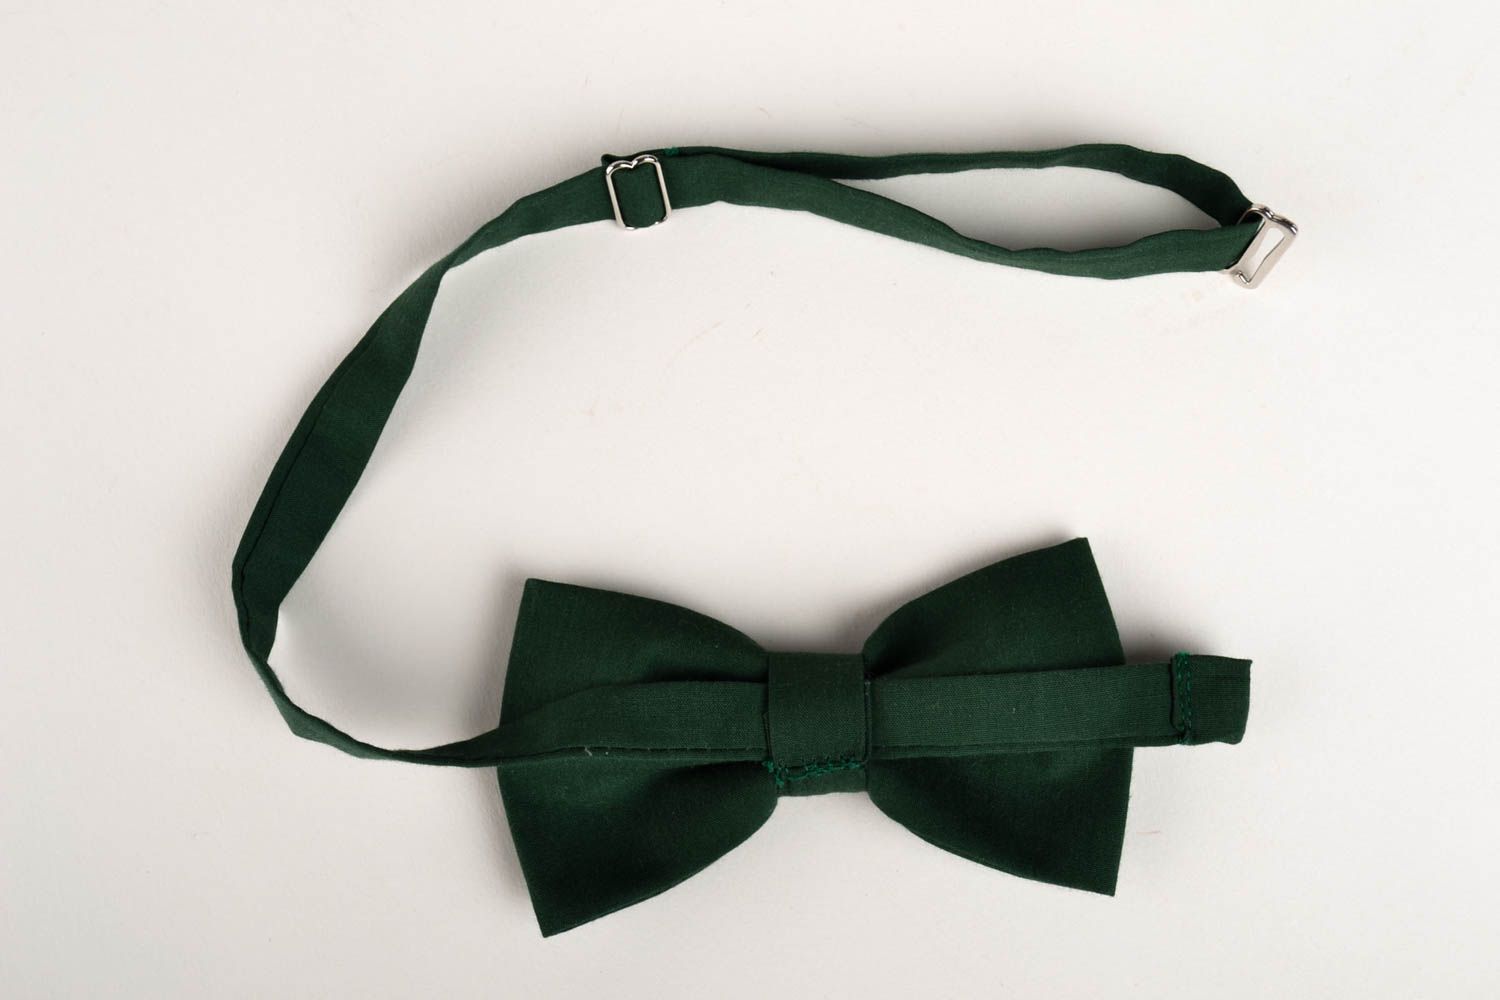 Handmade textile bow tie fashion trends handmade accessories gifts for him photo 2